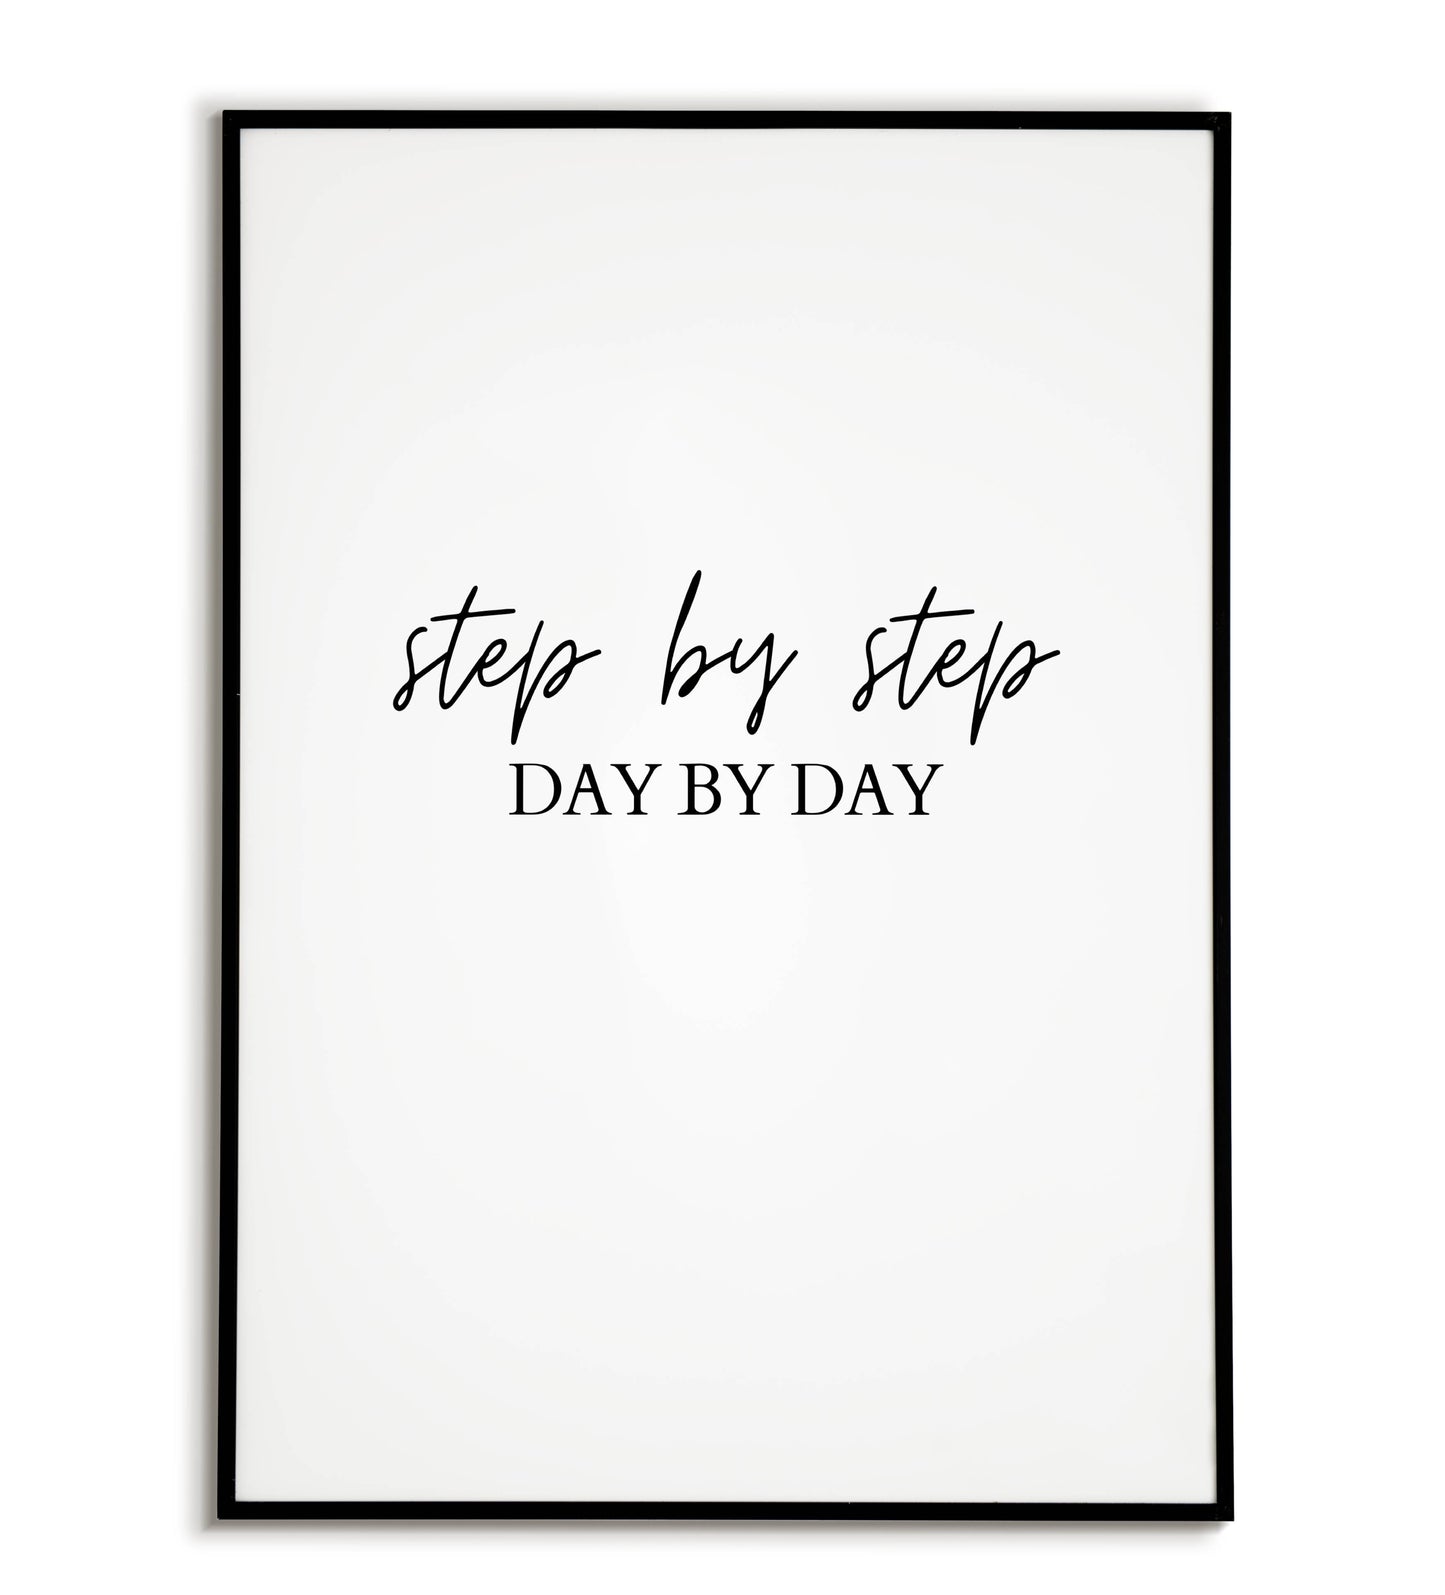 Inspirational "Step by Step Day by Day" printable poster, promoting patience and progress.	